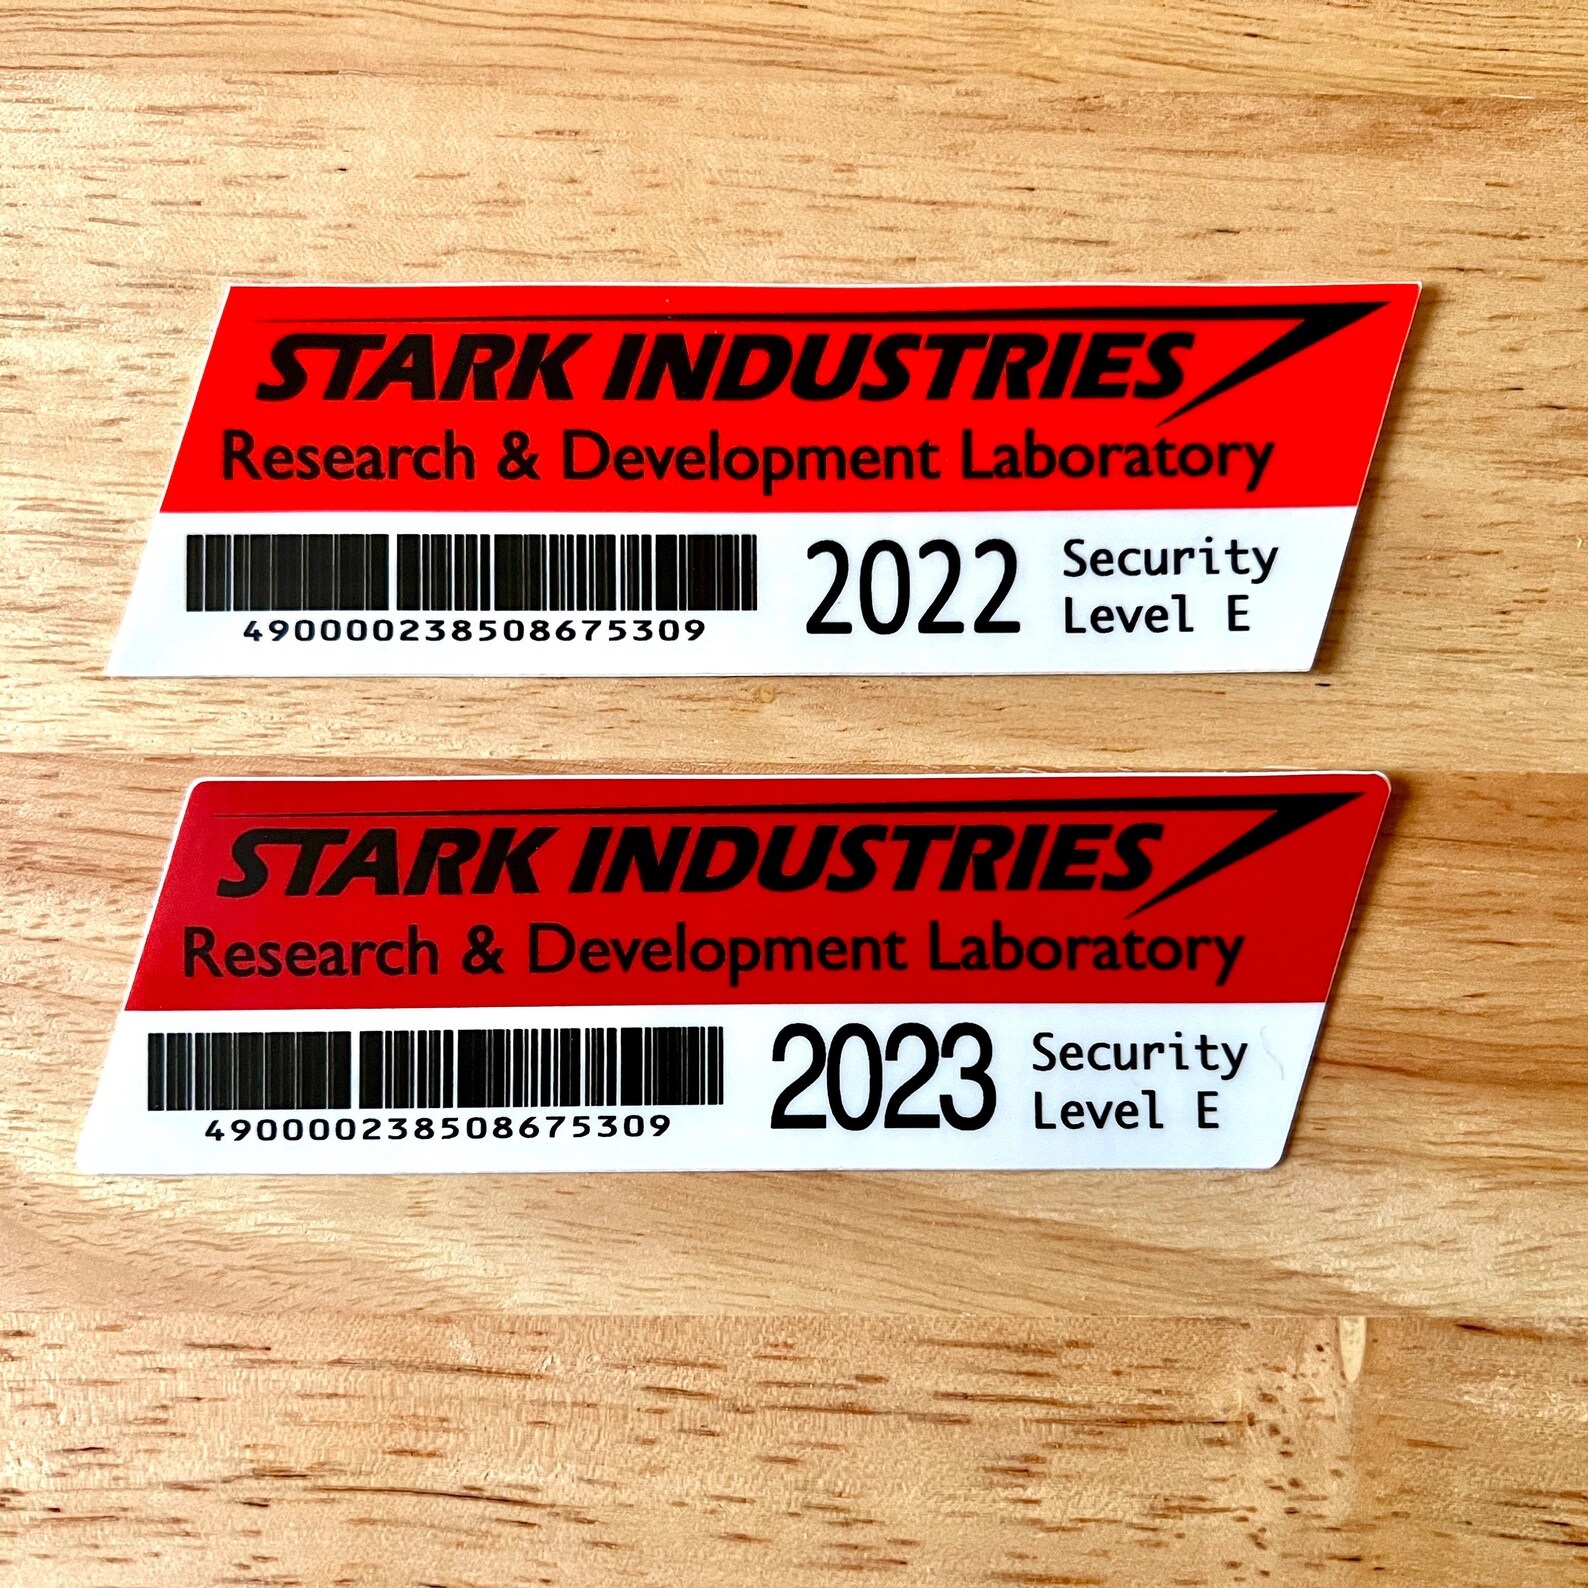 Two red-and-white car decals with the Stark Industries logo and the words "Research & Development Laboratory, Security Level E." One is for 2022, the other for 2023.